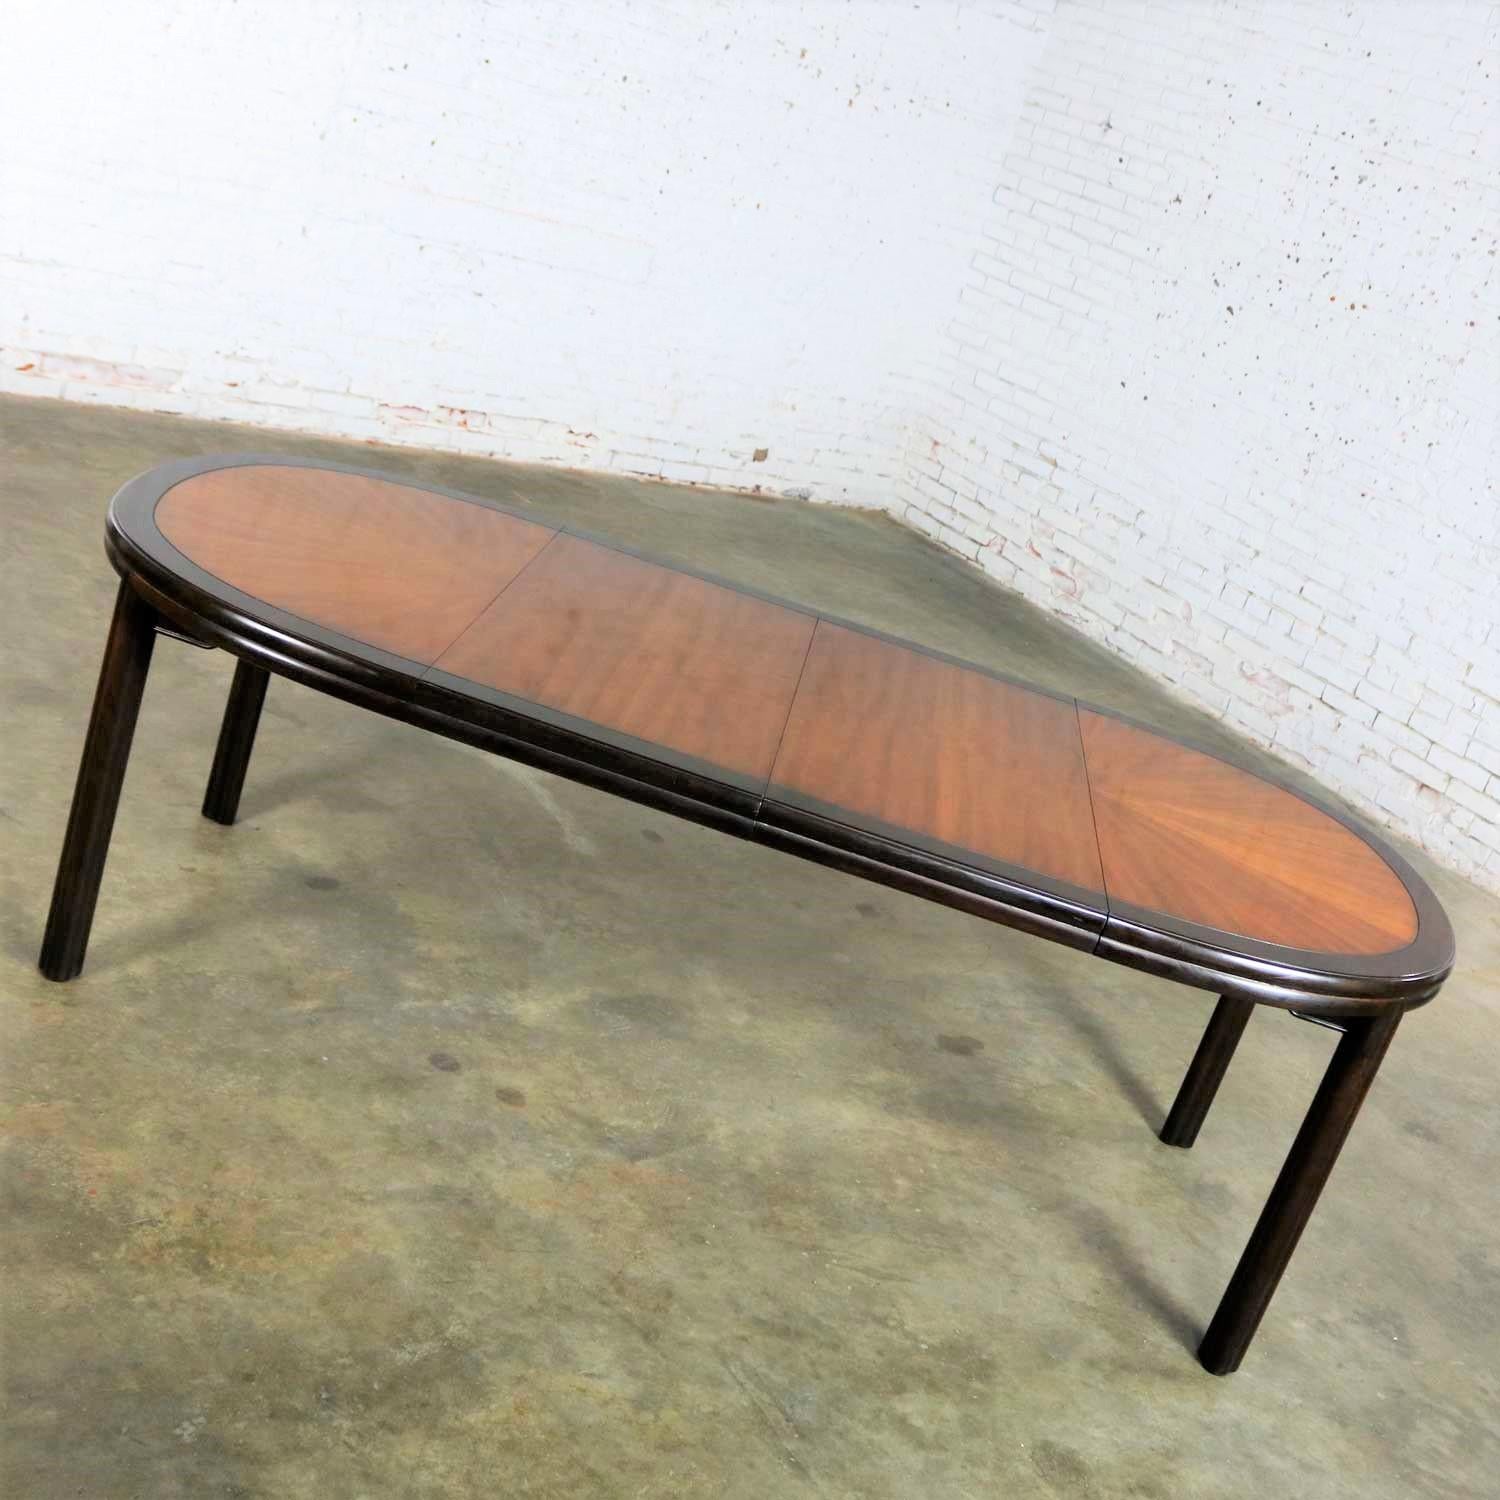 Handsome two-toned Ming style oval dining table with two aproned leaves and faux bamboo legs and edge by Drexel in the style of Chin Hua. It is in wonderful vintage condition with normal wear for its age including slight scratches to finish but